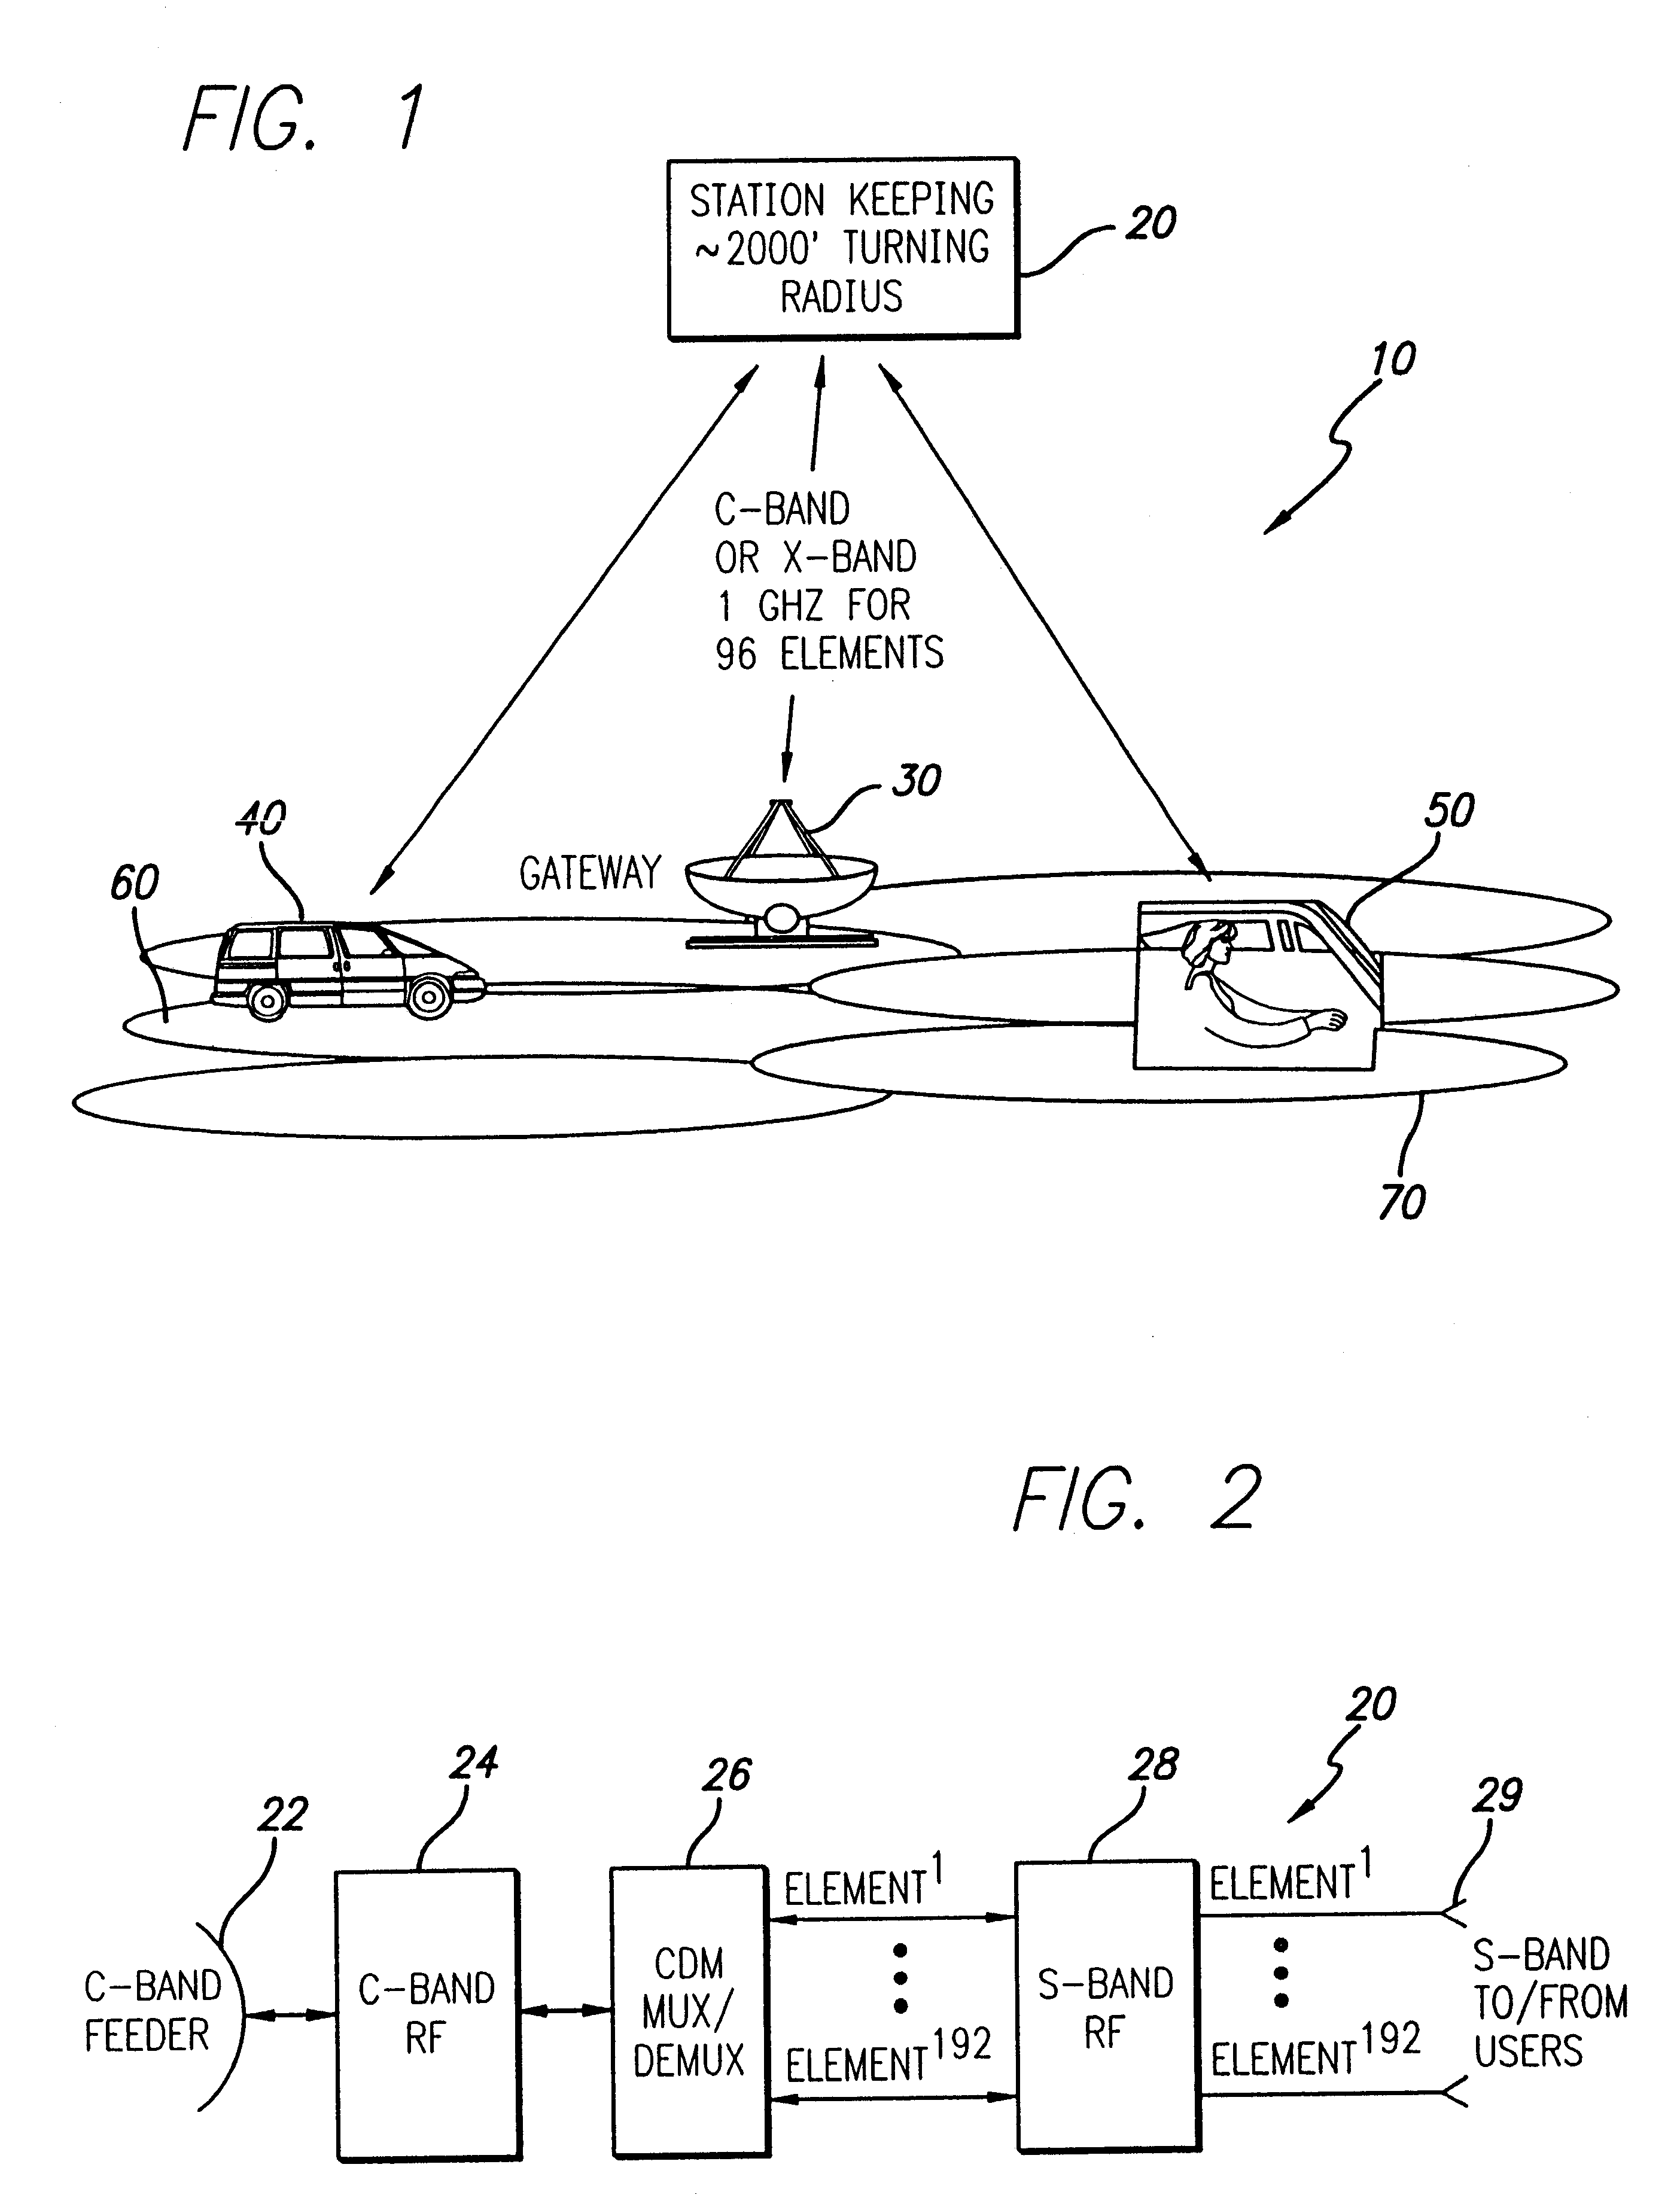 Micro cell architecture for mobile user tracking communication system